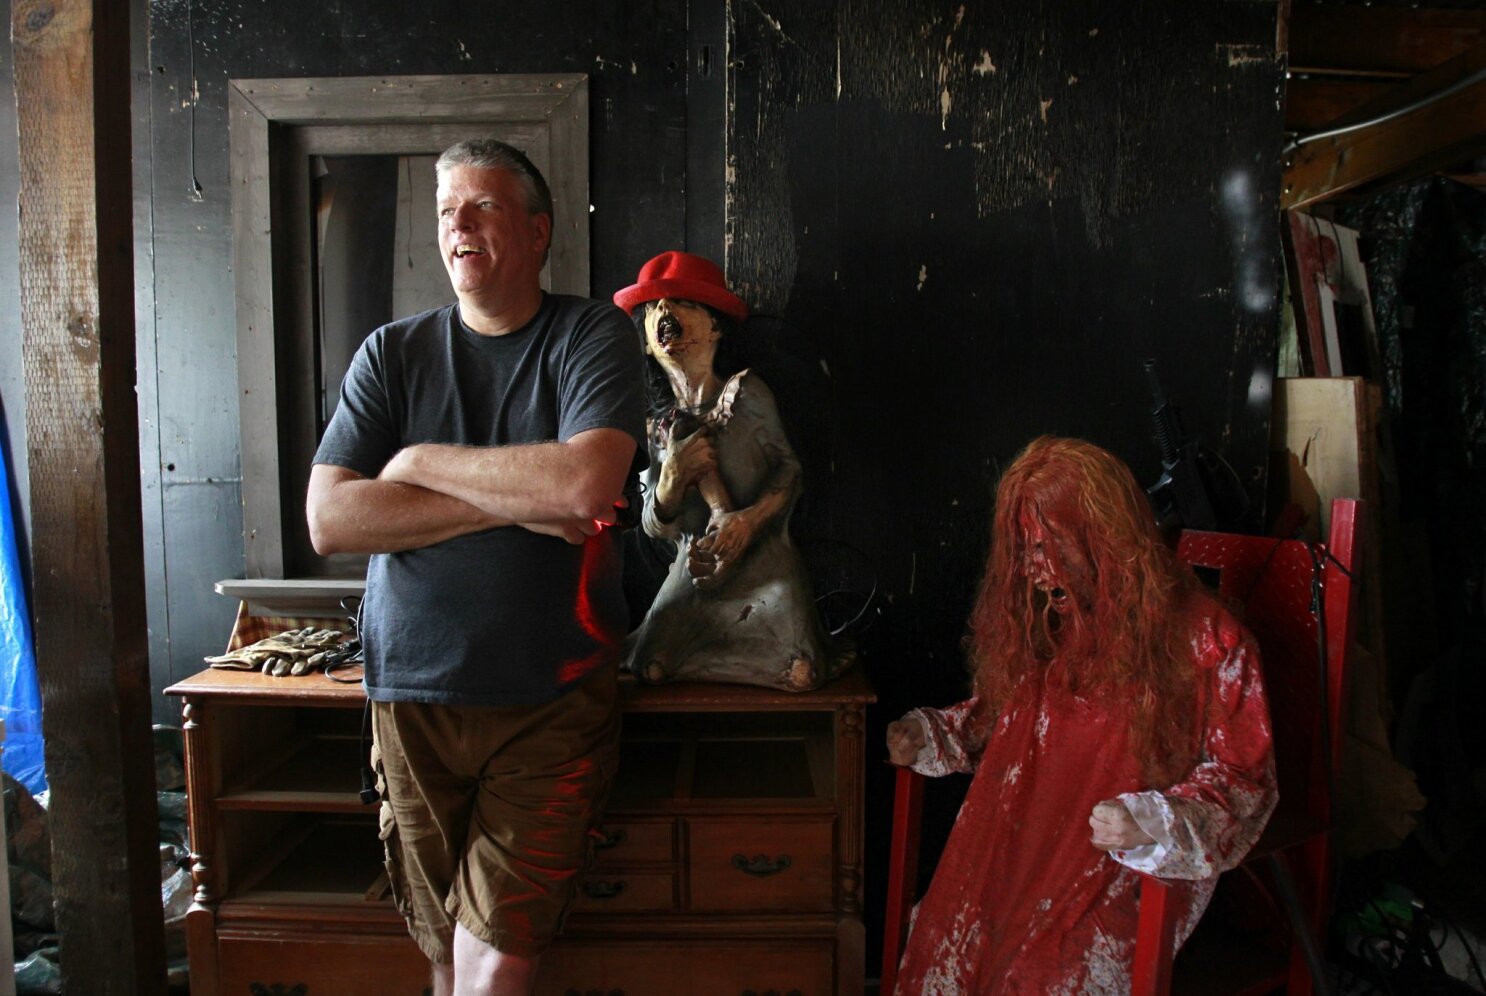 Infamous haunted house leaving town - The San Diego Union-Tribune